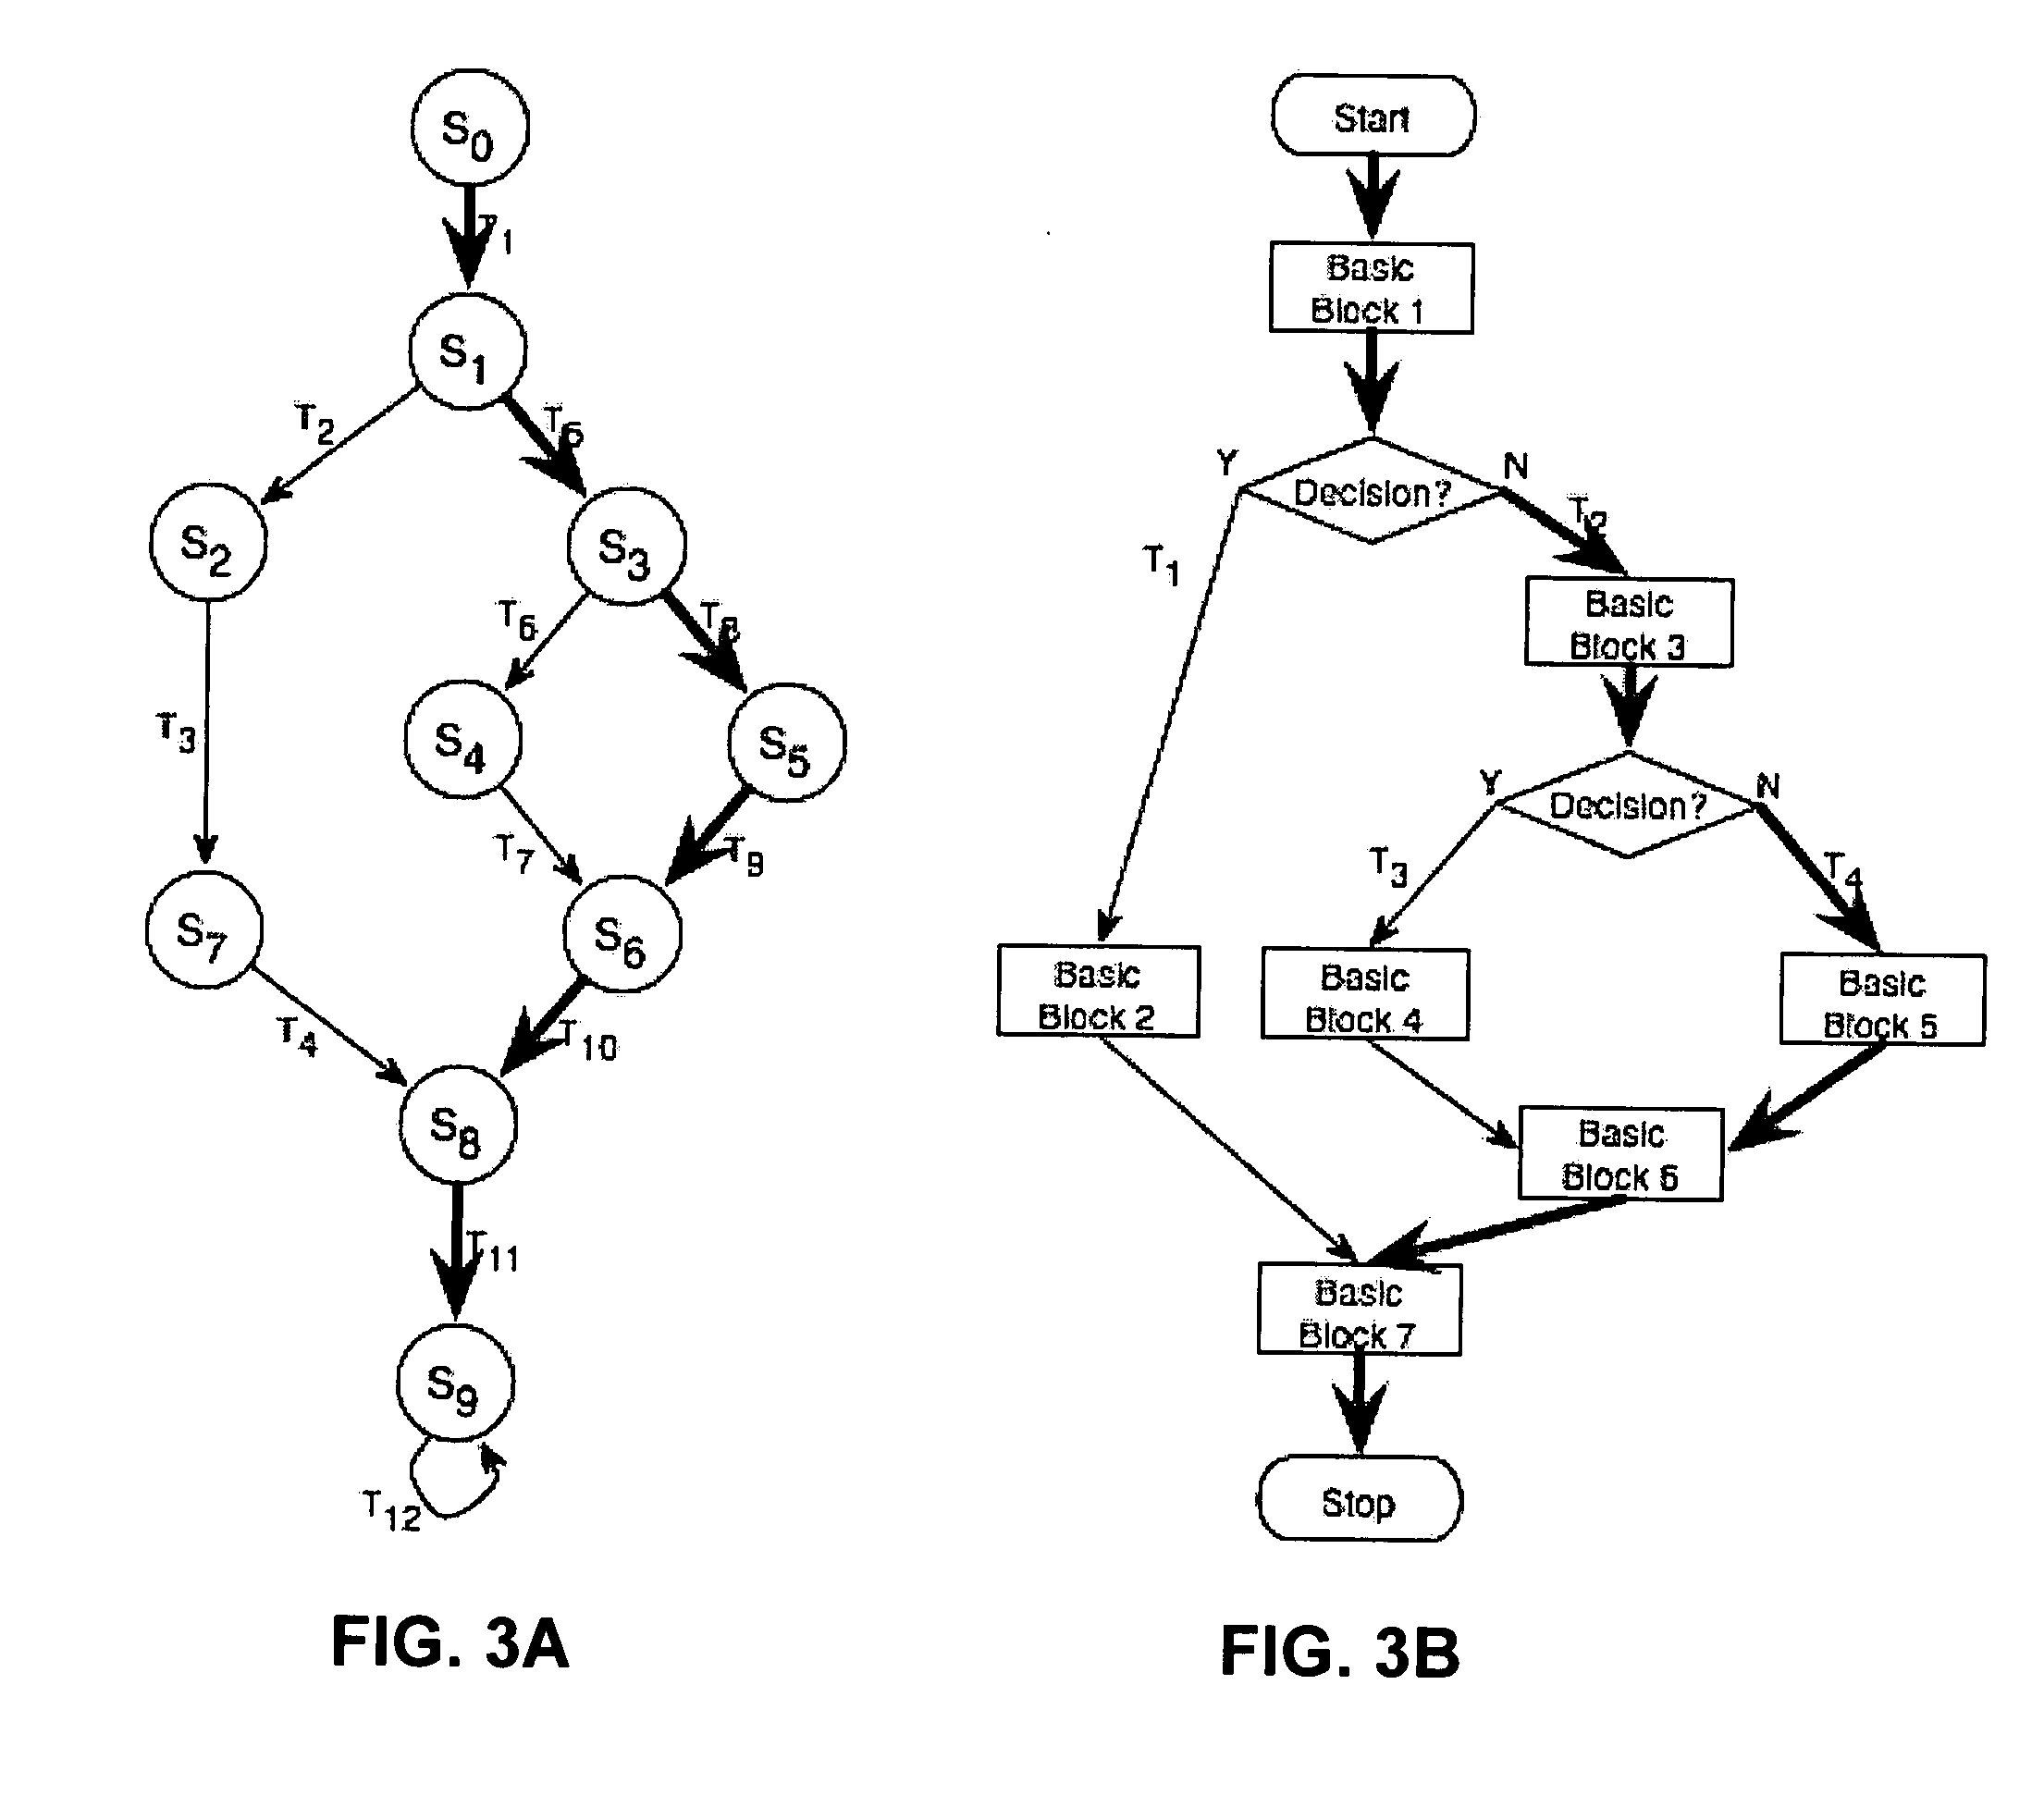 Automatically generating an input sequence for a circuit design using mutant-based verification